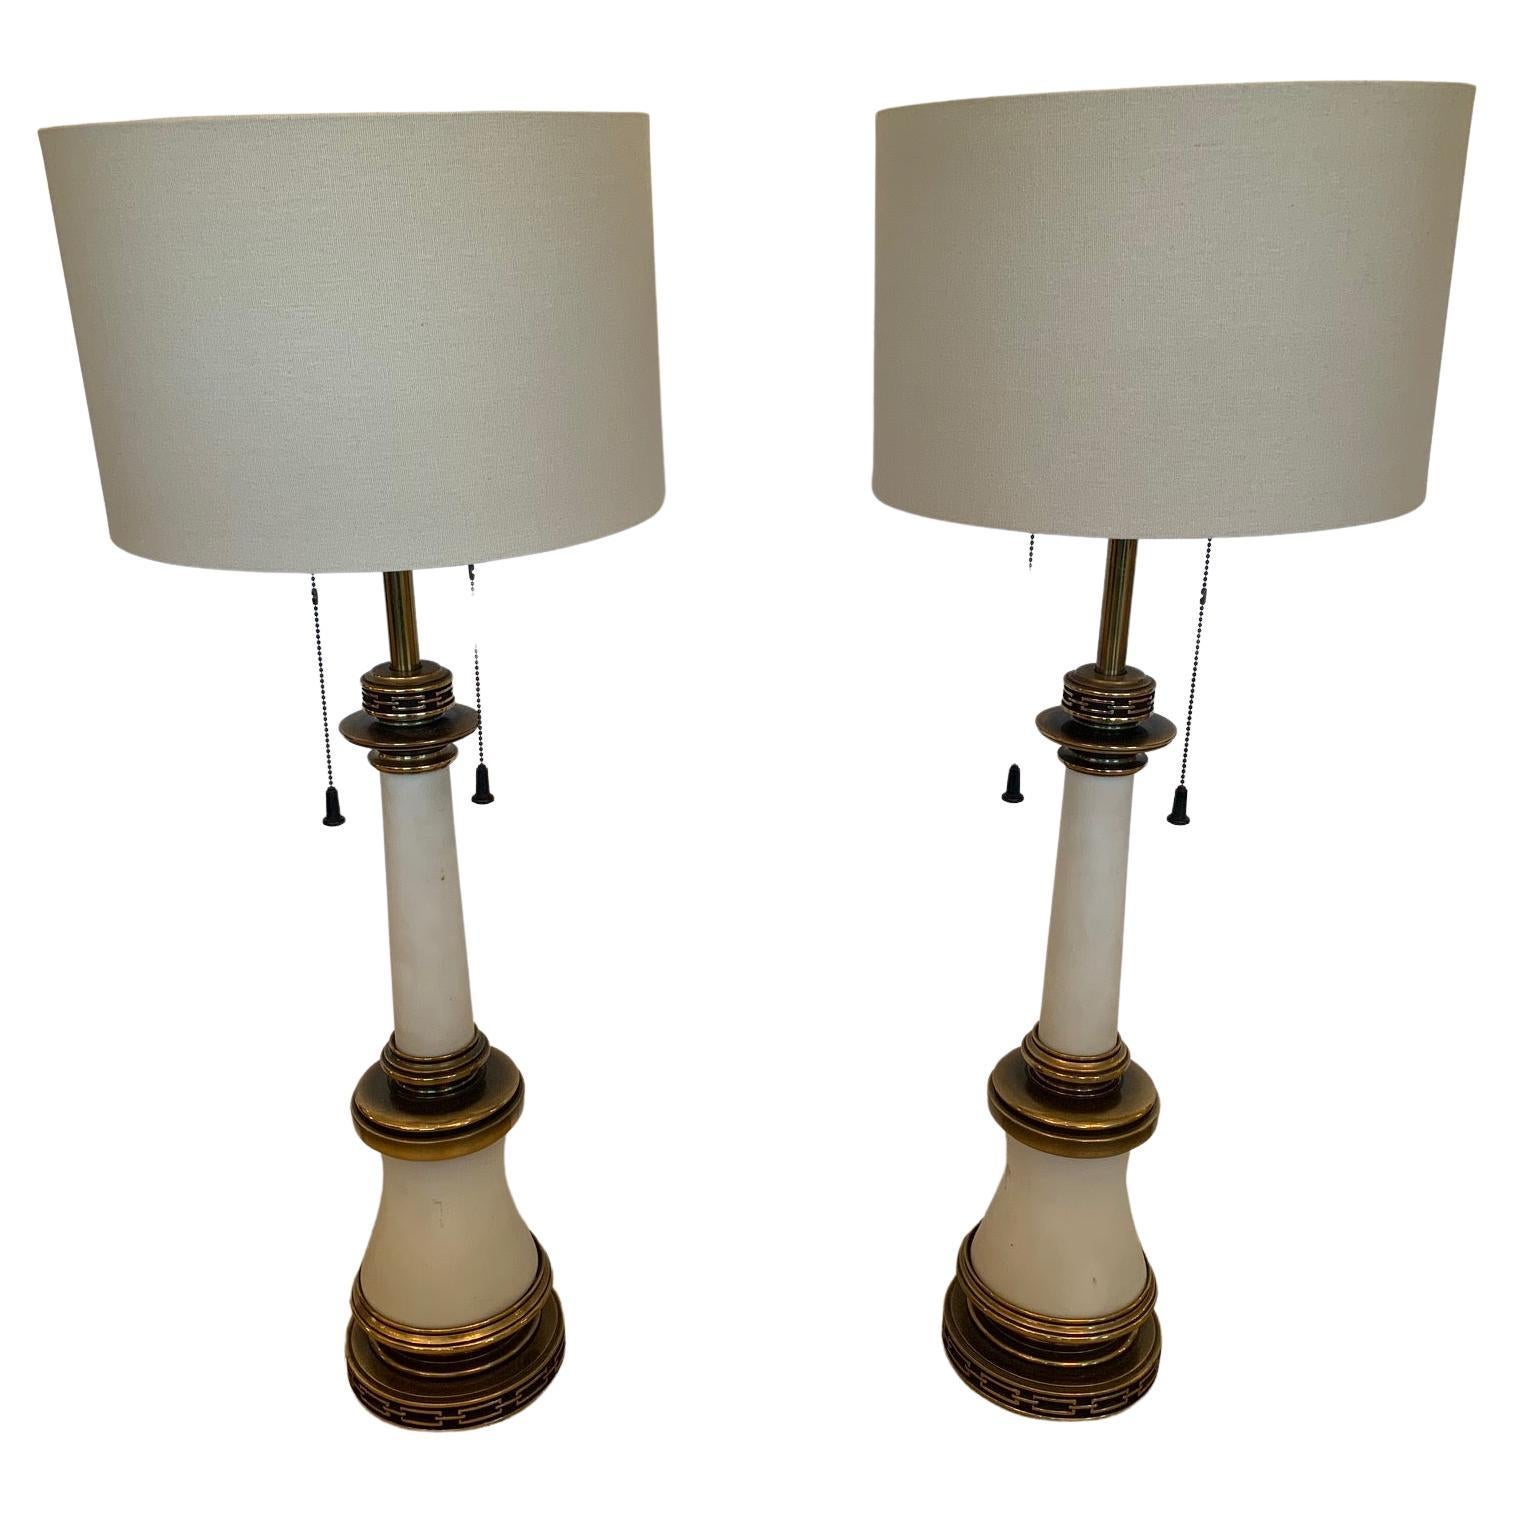 Pair of Elegant Tall Stiffel Table Lamps For Sale